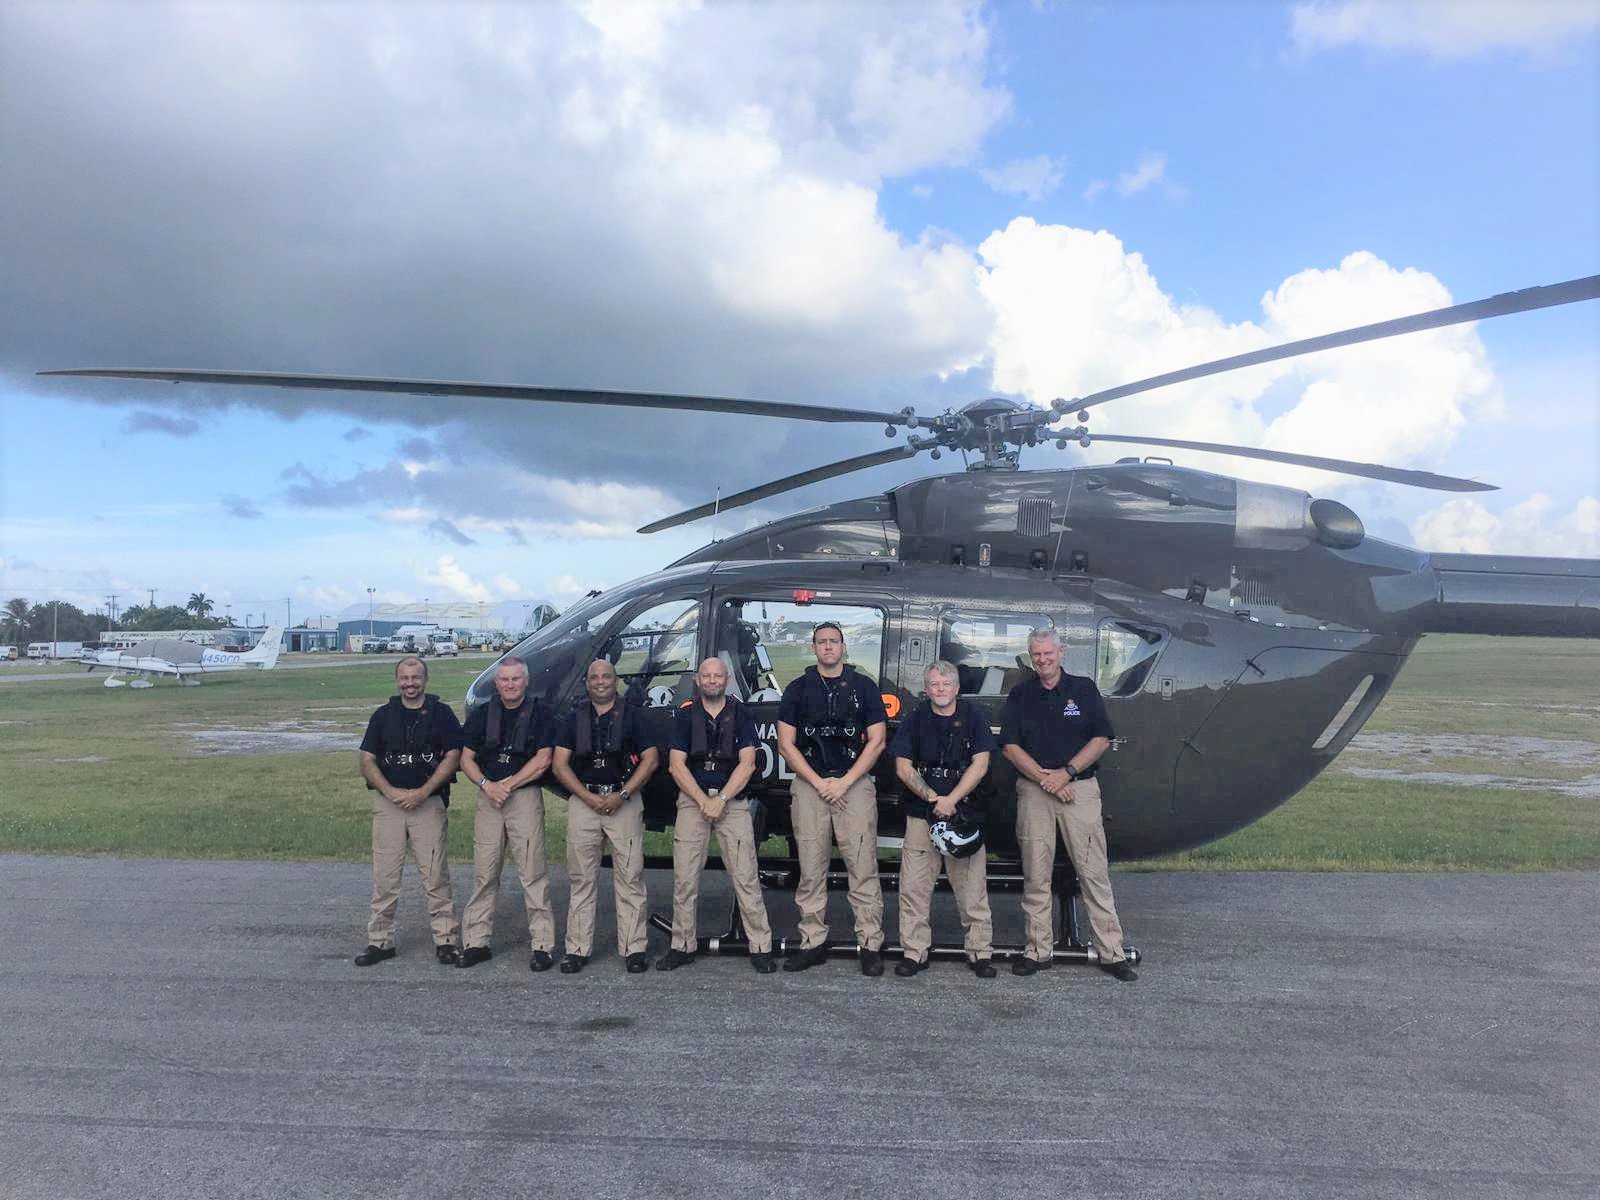 Cayman Islands police helicopter deployed to Bahamas